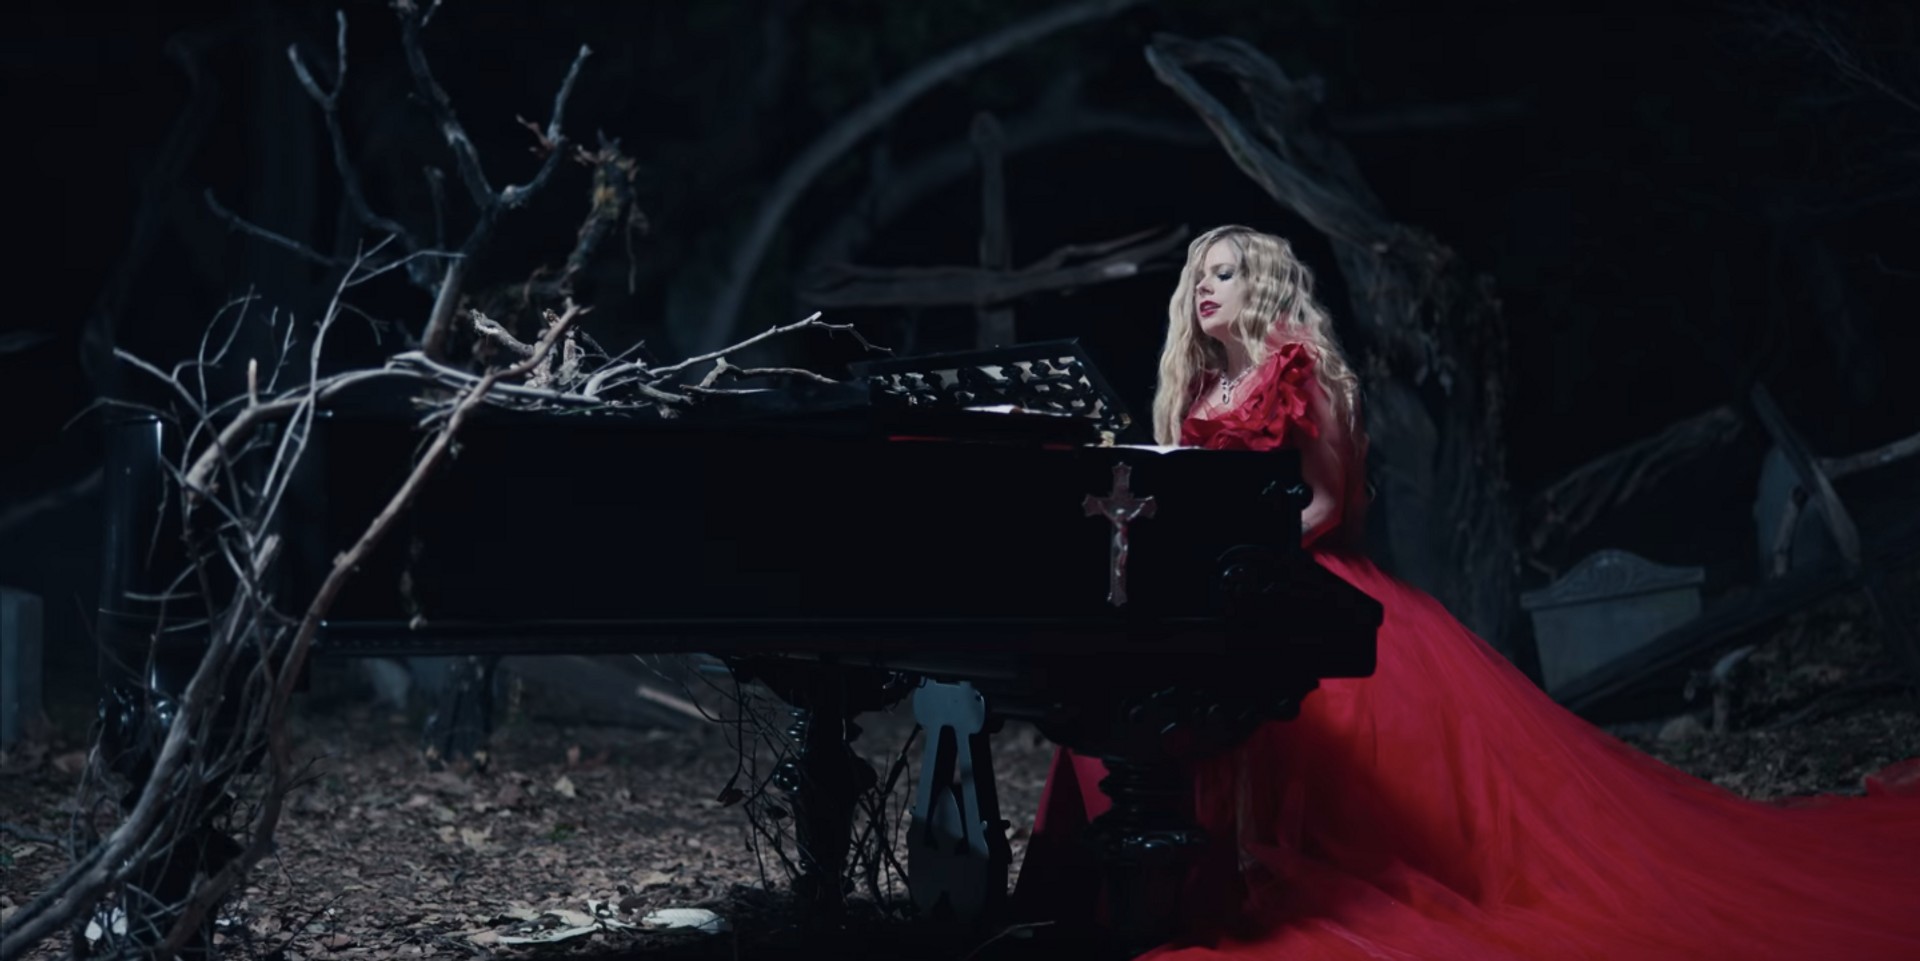 Avril Lavigne releases eerie music video for ‘I Fell In Love With The Devil’ – watch